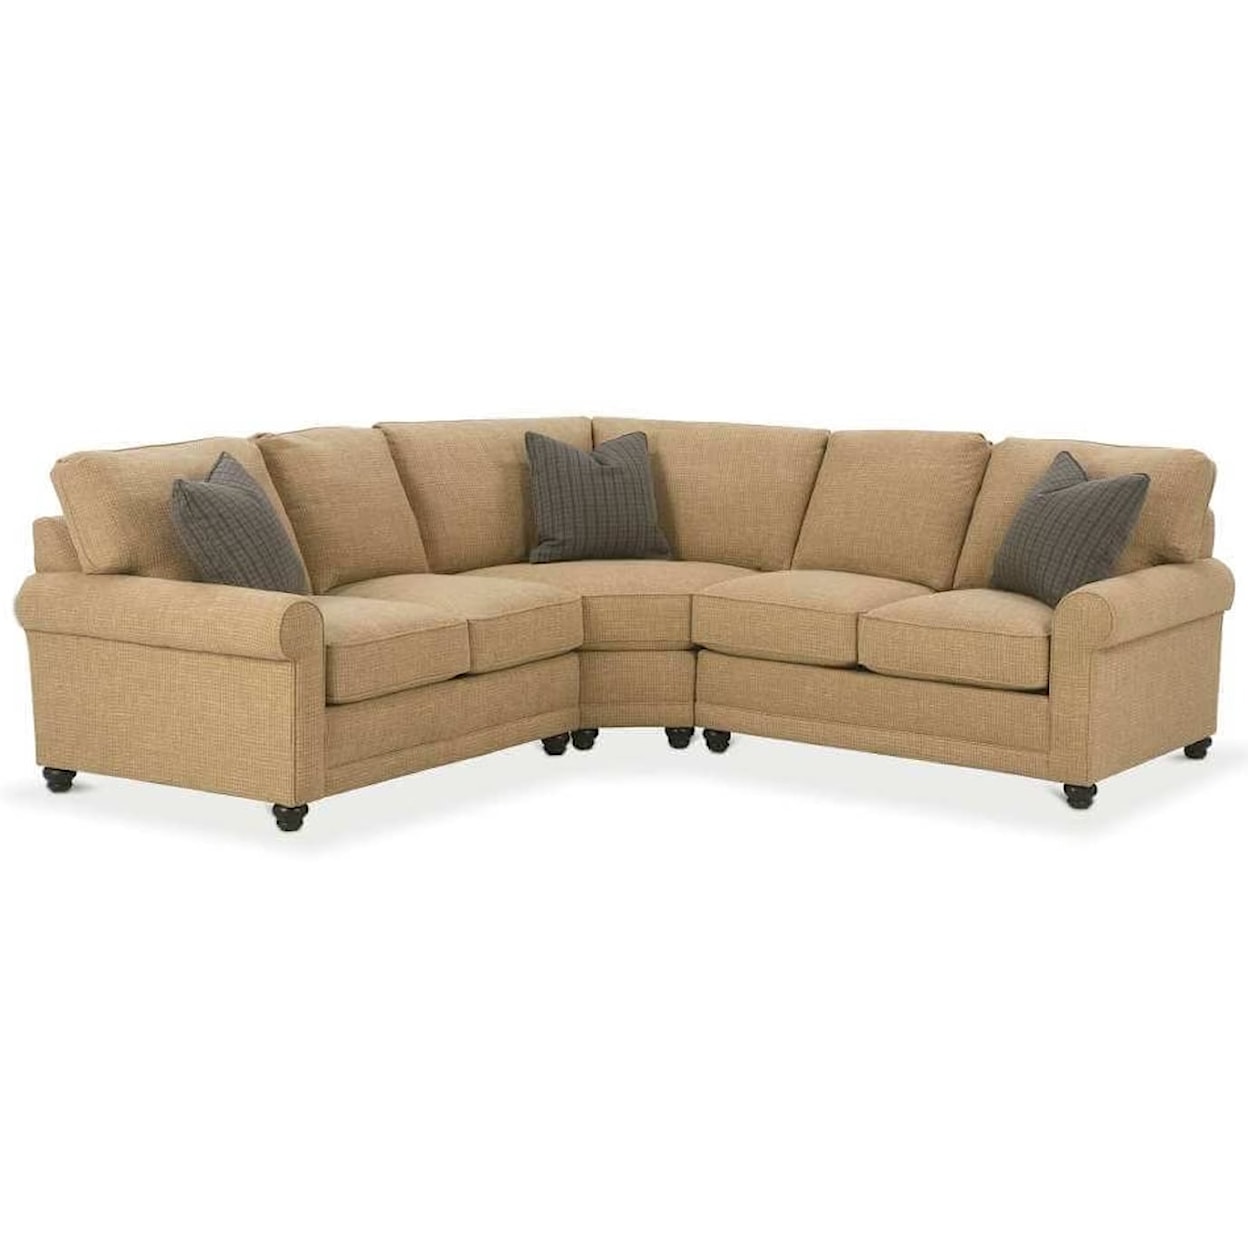 Rowe My Style I Group My Style I Two Piece Sectional